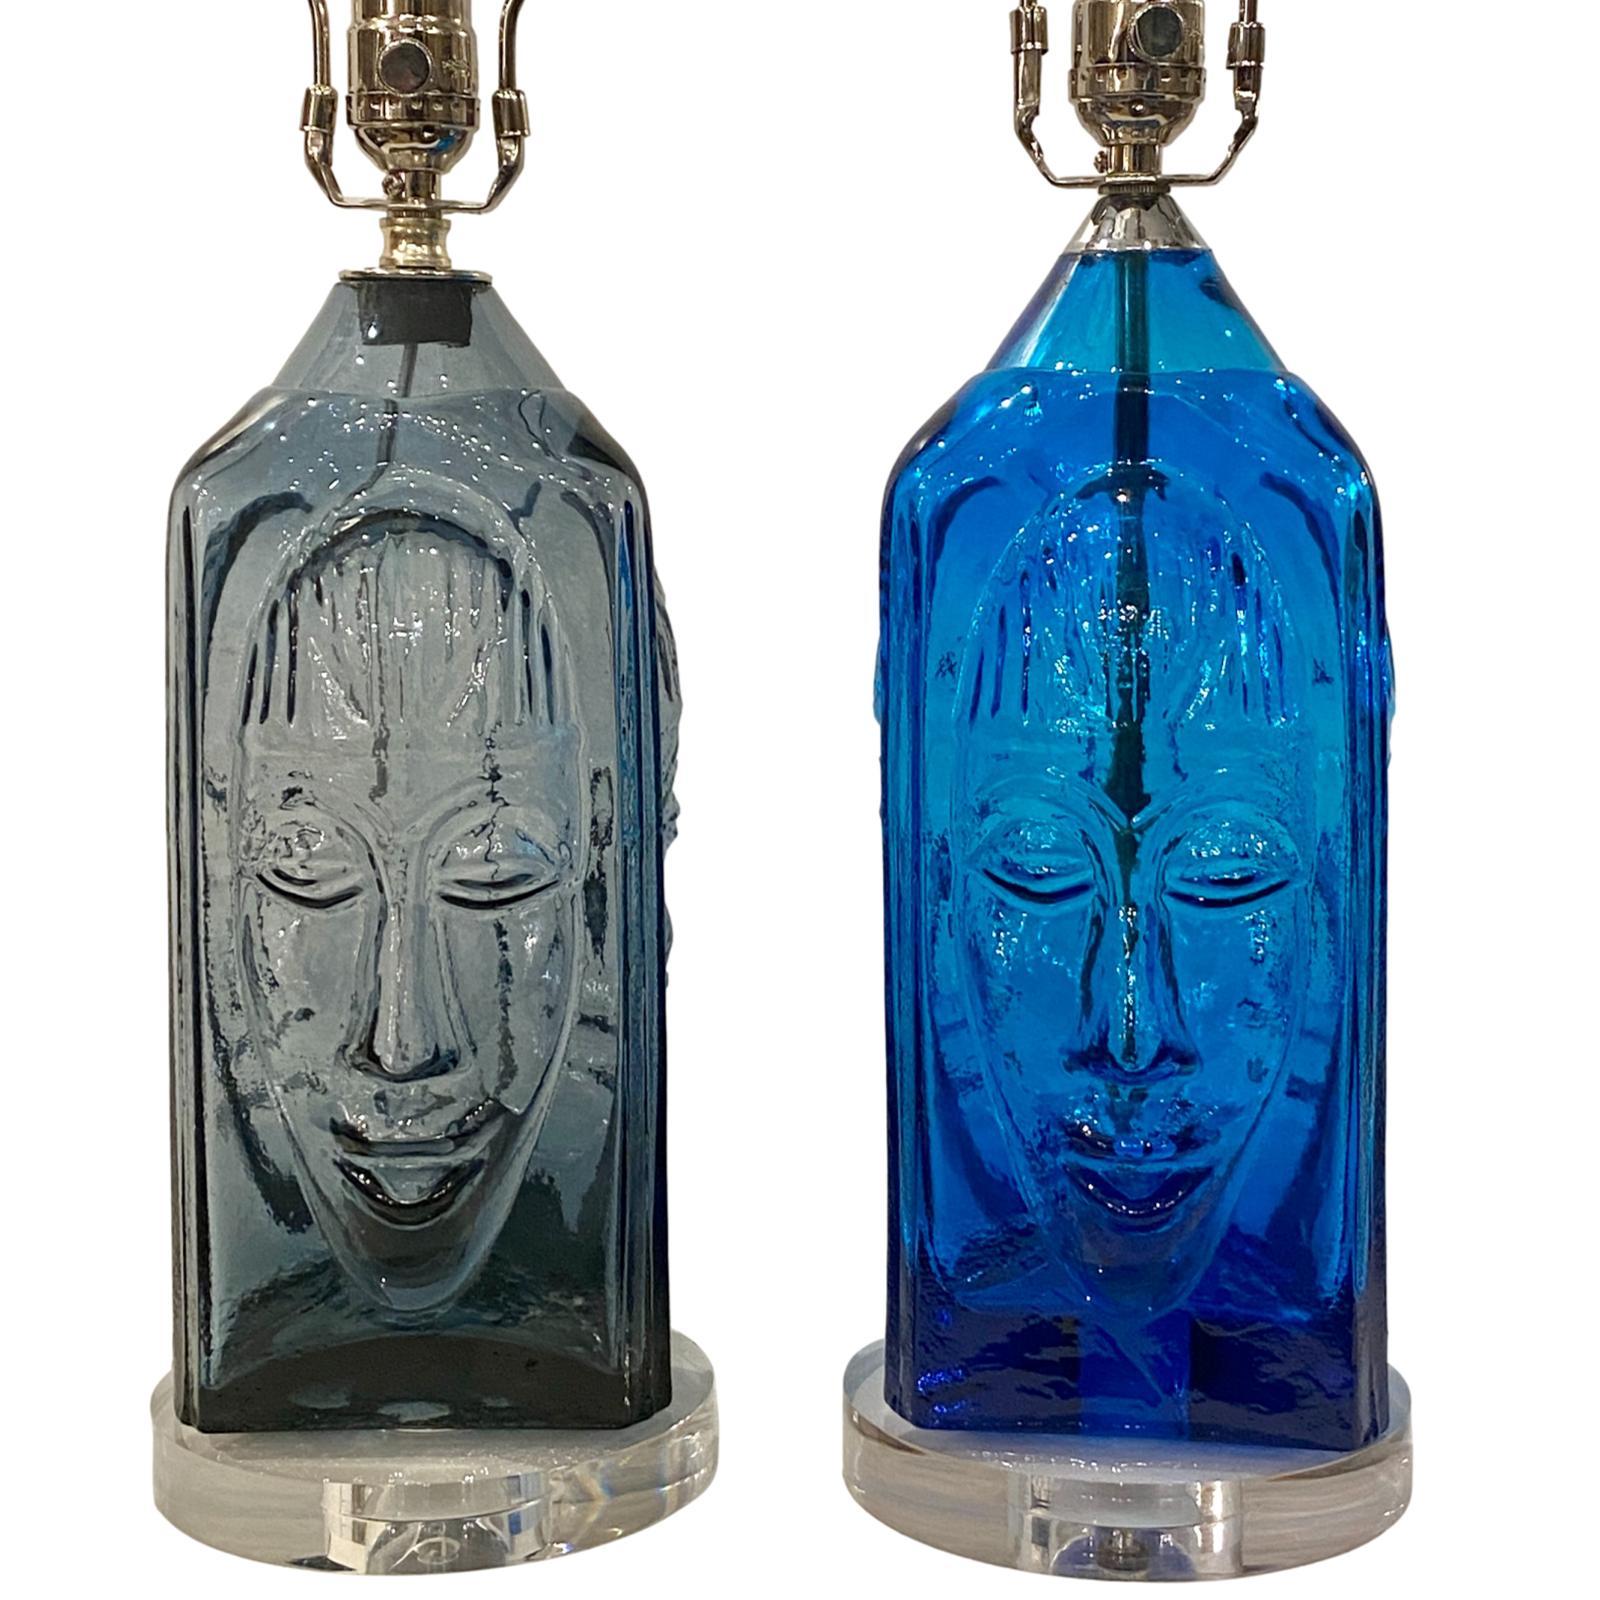 A pair of circa 1960s Swedish molded blue and smoke glass table lamps with Lucite bases and nickel-plated hardware.

Measurements:
Height of body 14